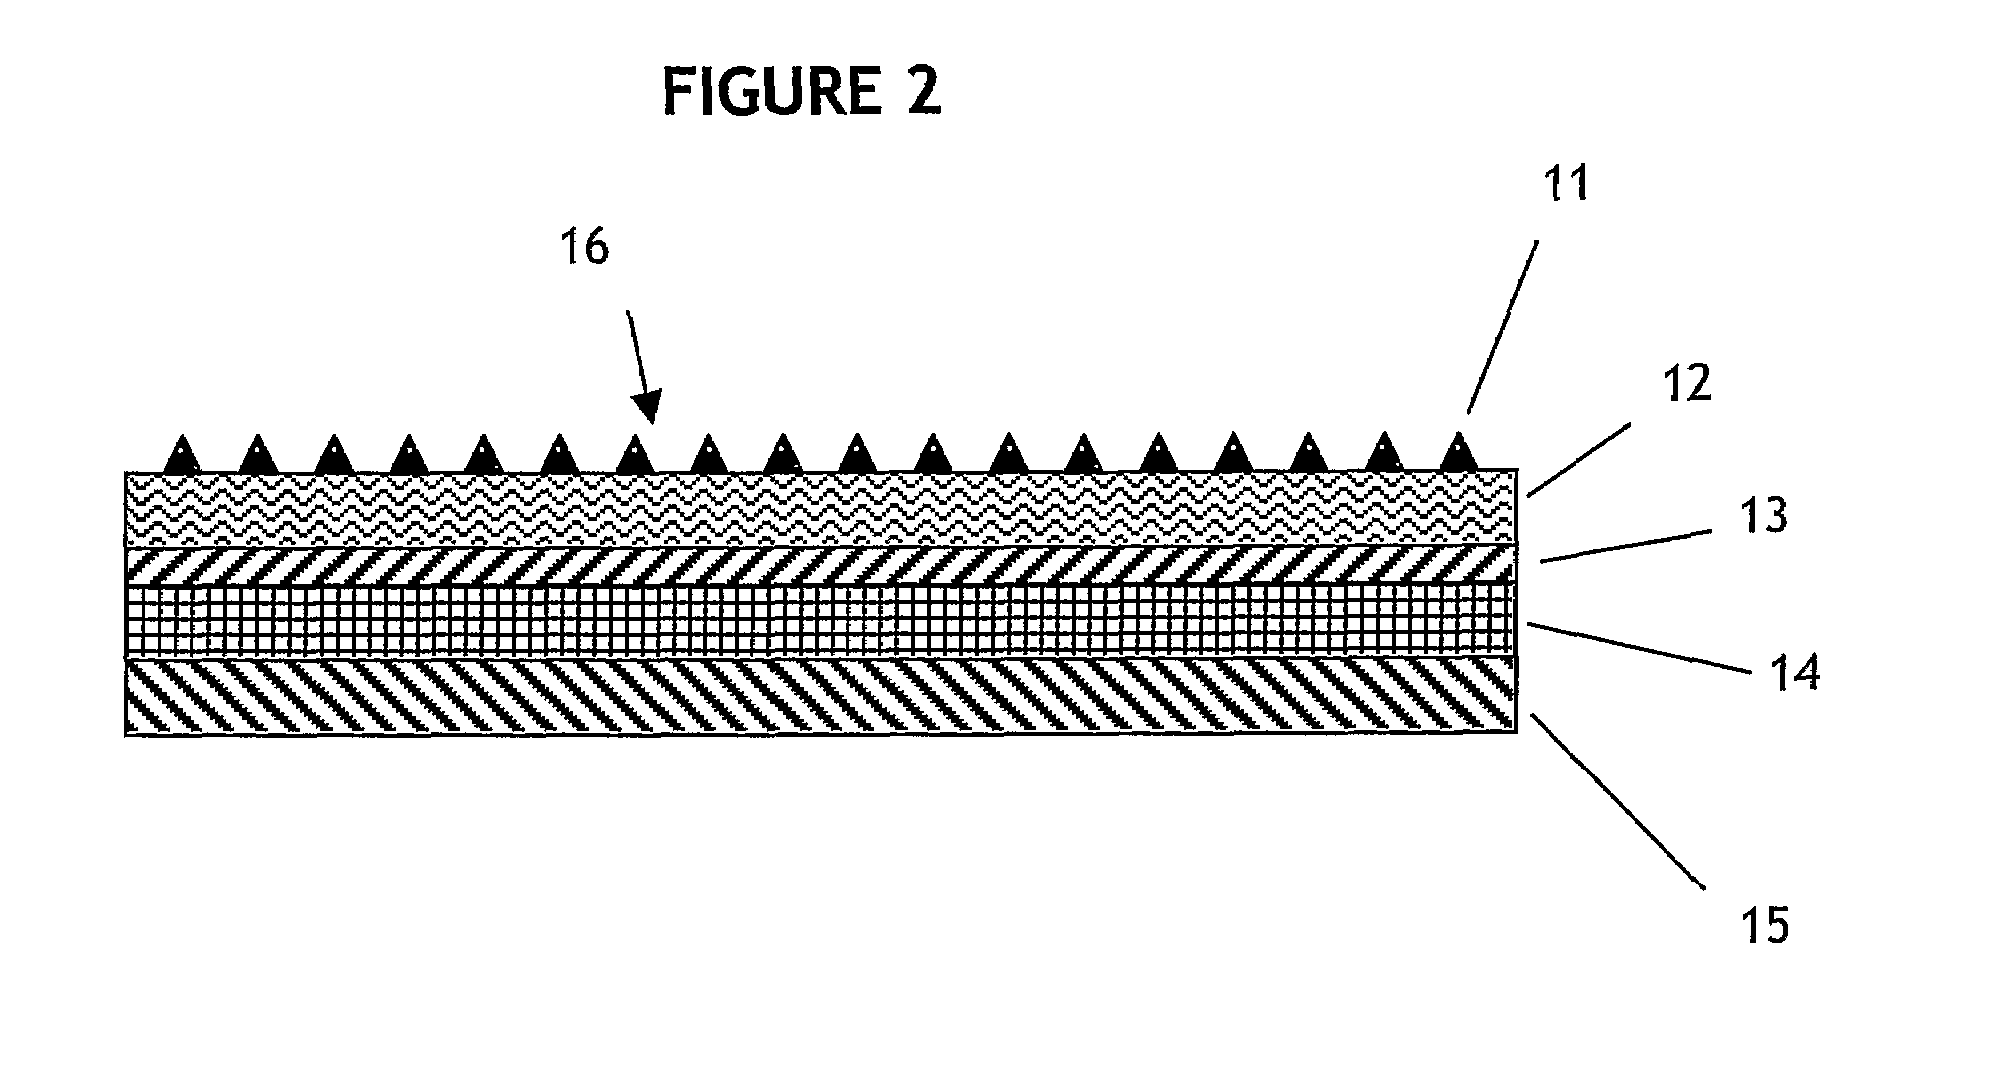 Waterproofing Membrane For Use on Inclined Surfaces